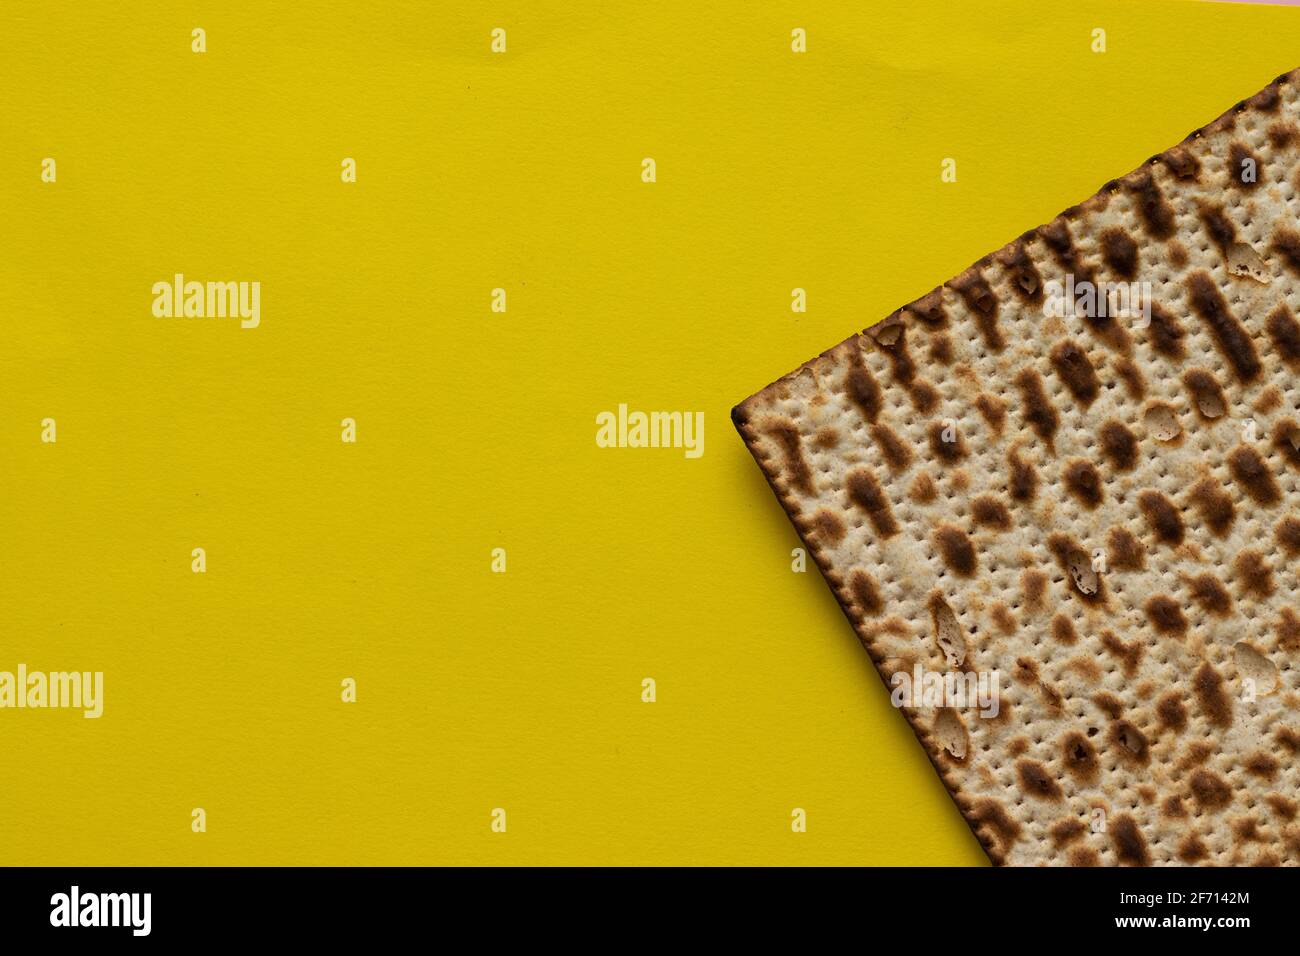 A close-up of a matzah- bread for the Jewish Passover, on a yellow background Stock Photo